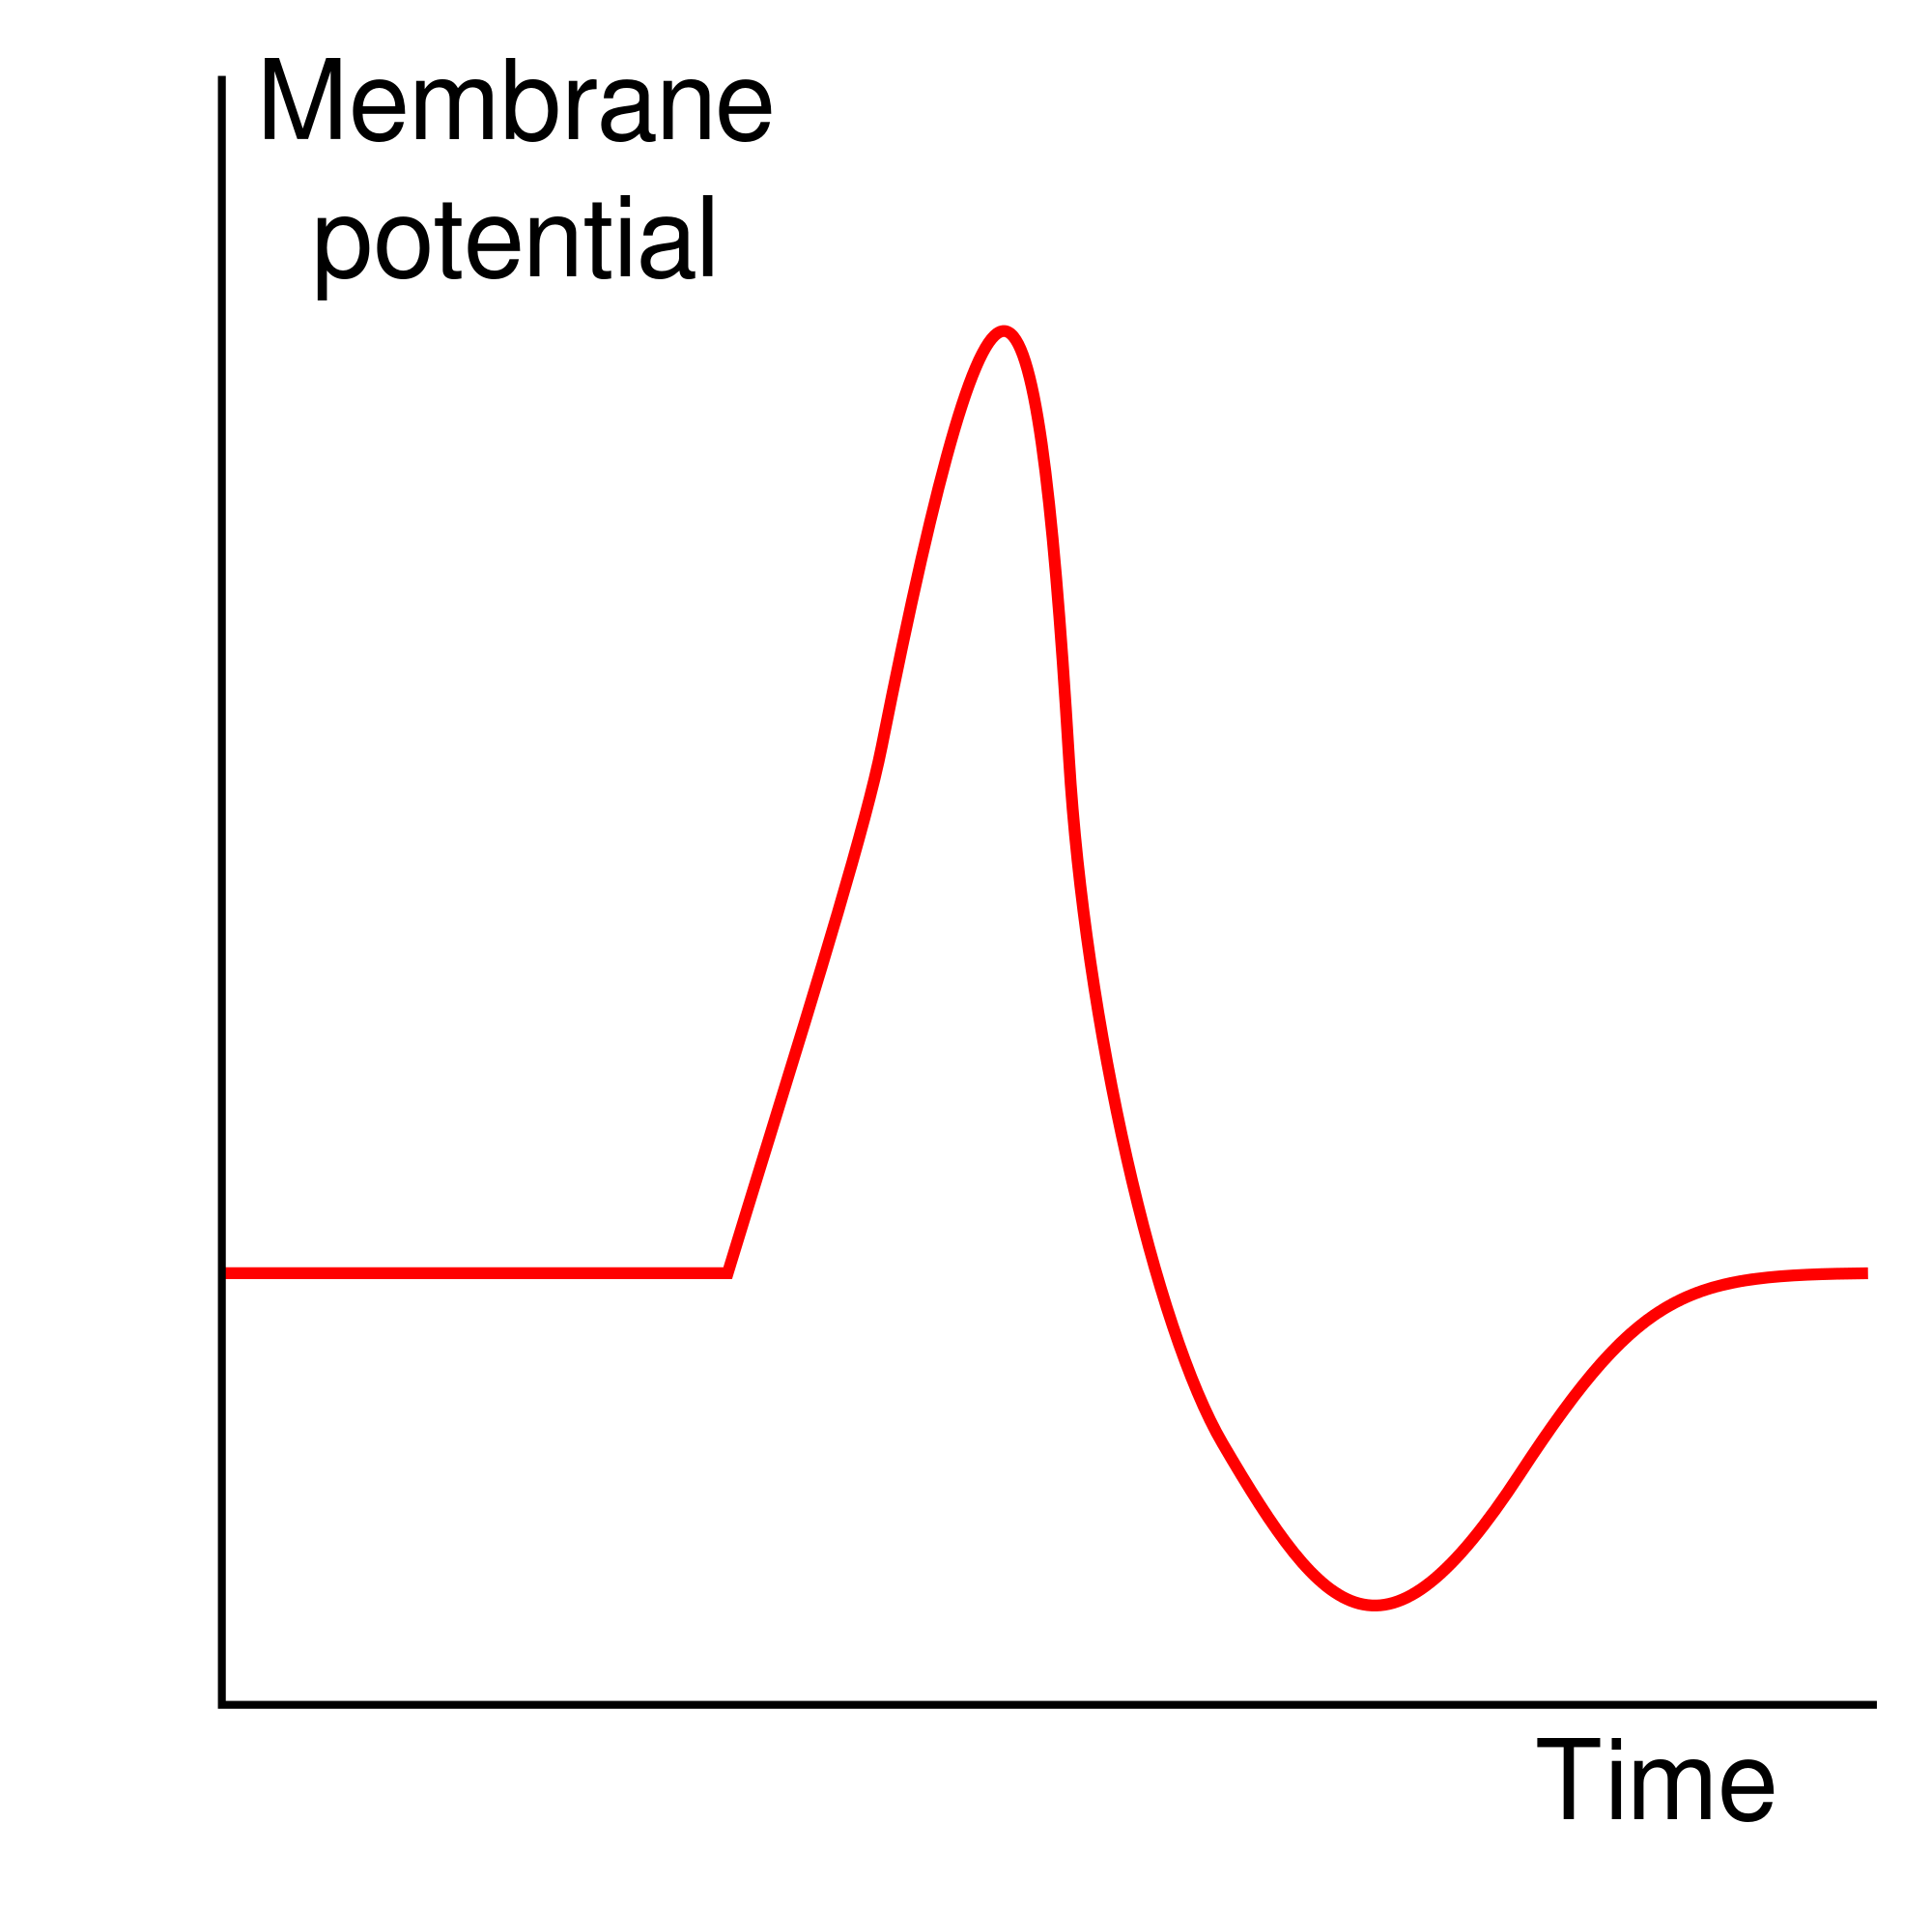 action potential graph